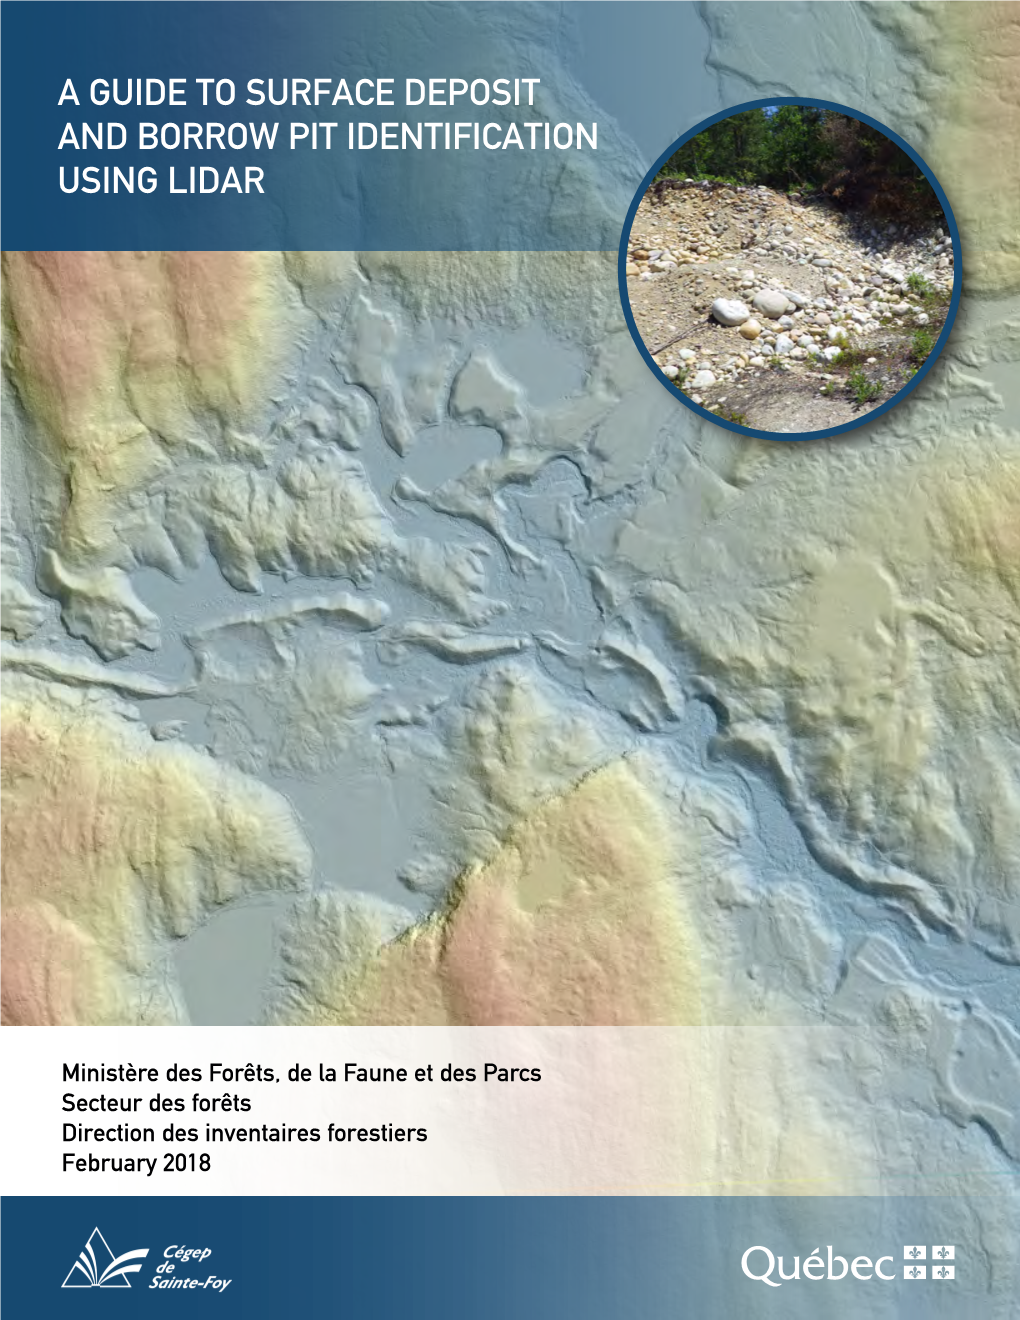 A Guide to Surface Deposit and Borrow Pit Identification Using Lidar